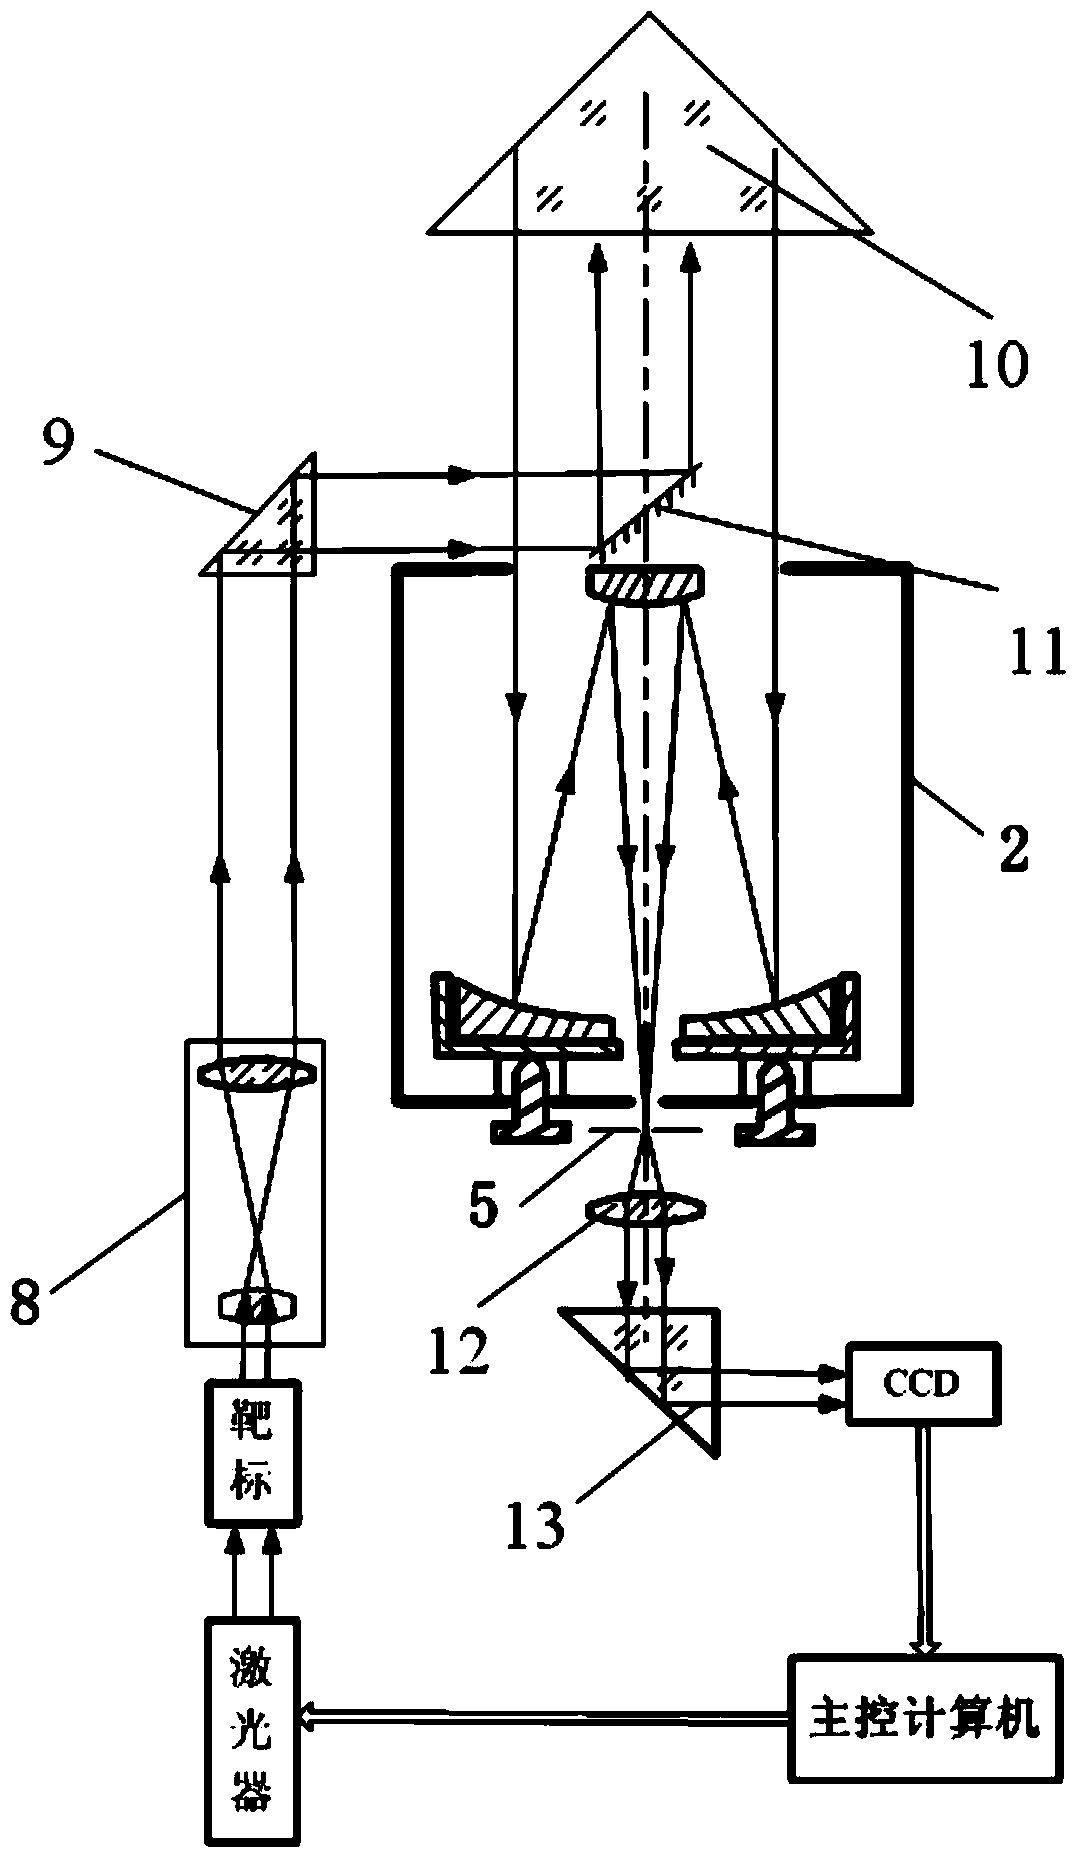 Fine particle laser radar system with adjustable focal position and self-calibration method